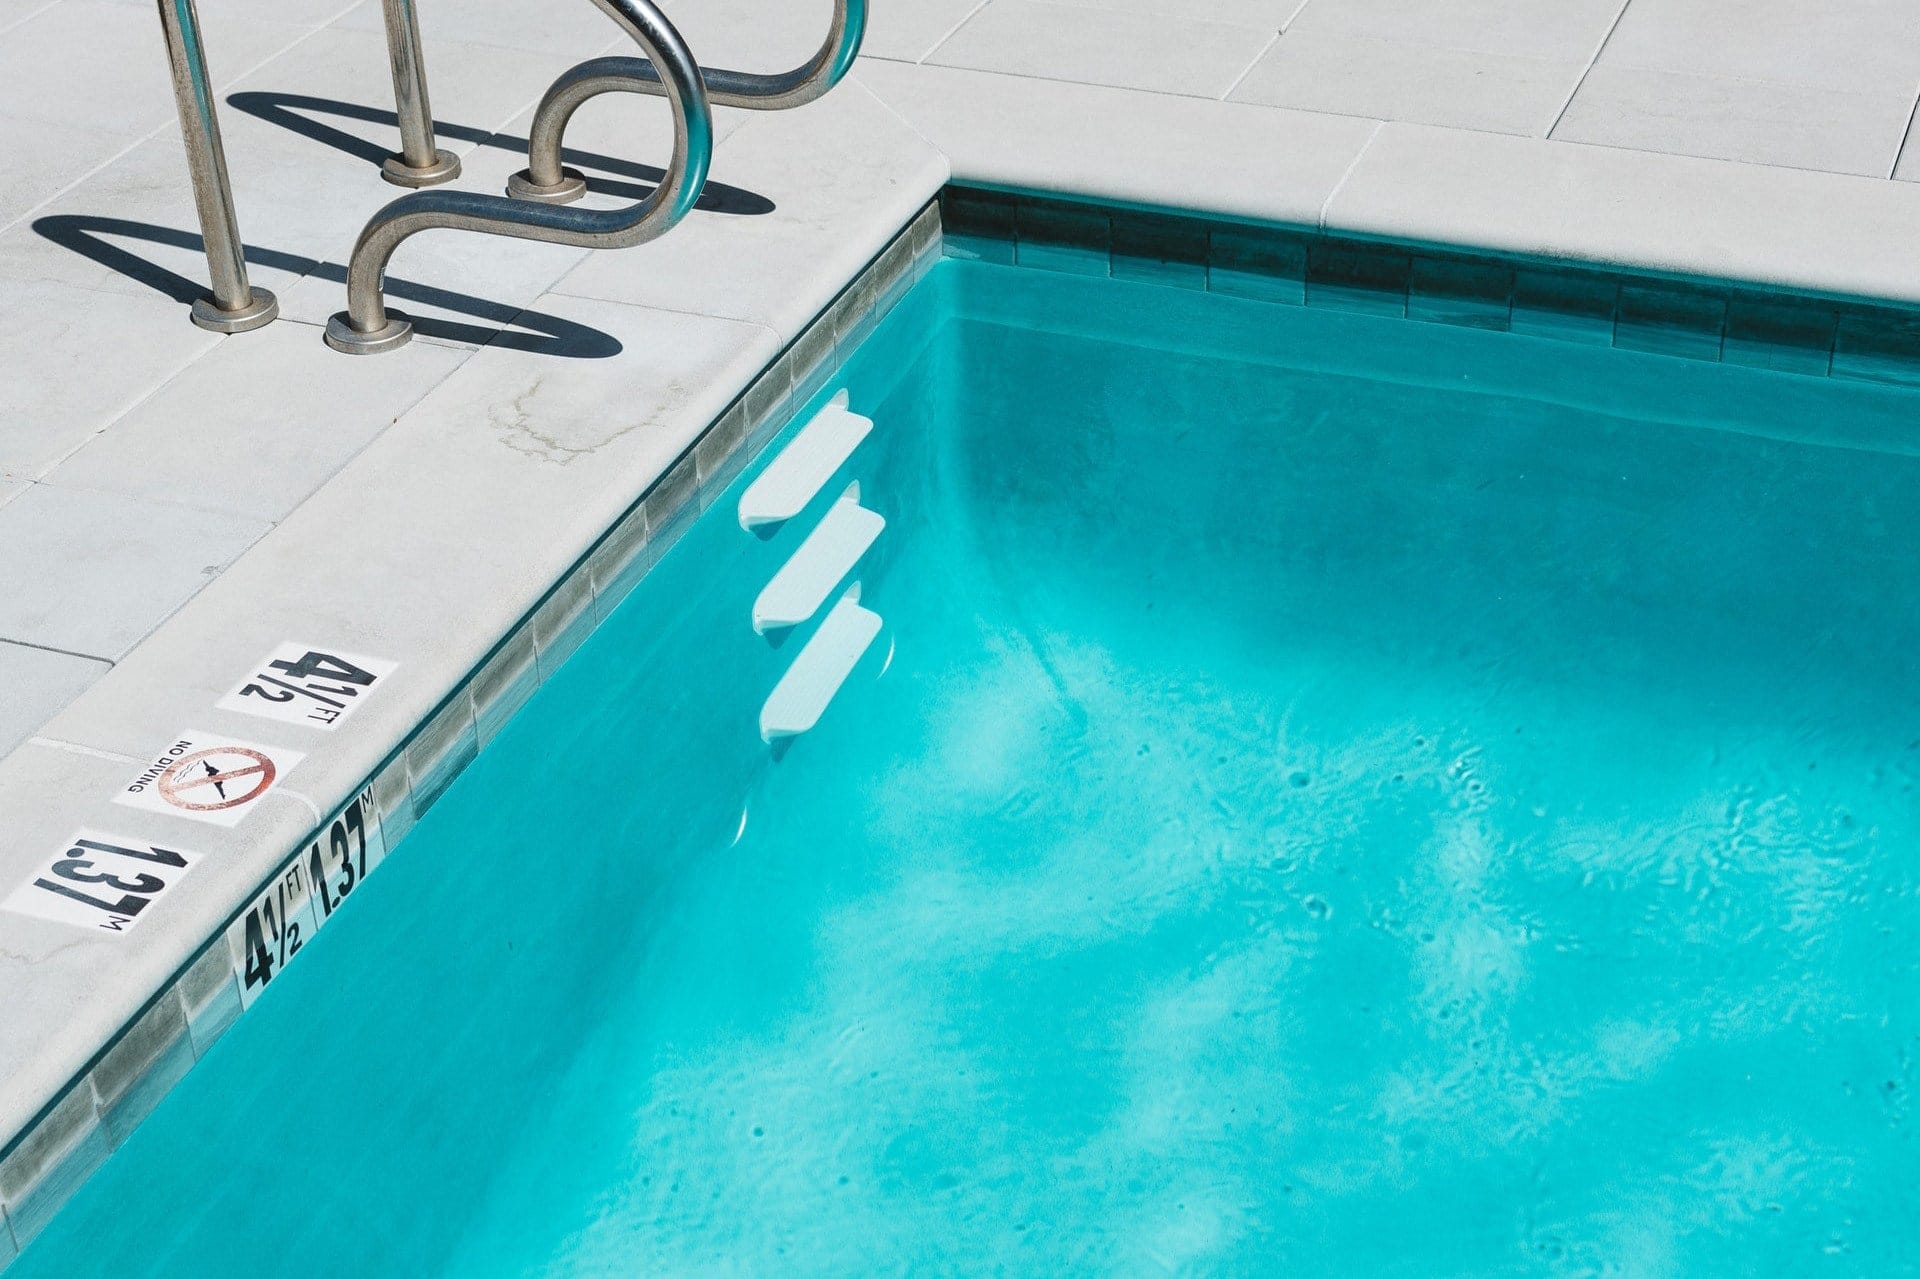 Remove Calcium Scale From Your Pool, How To Clean Calcium From Swimming Pool Tiles